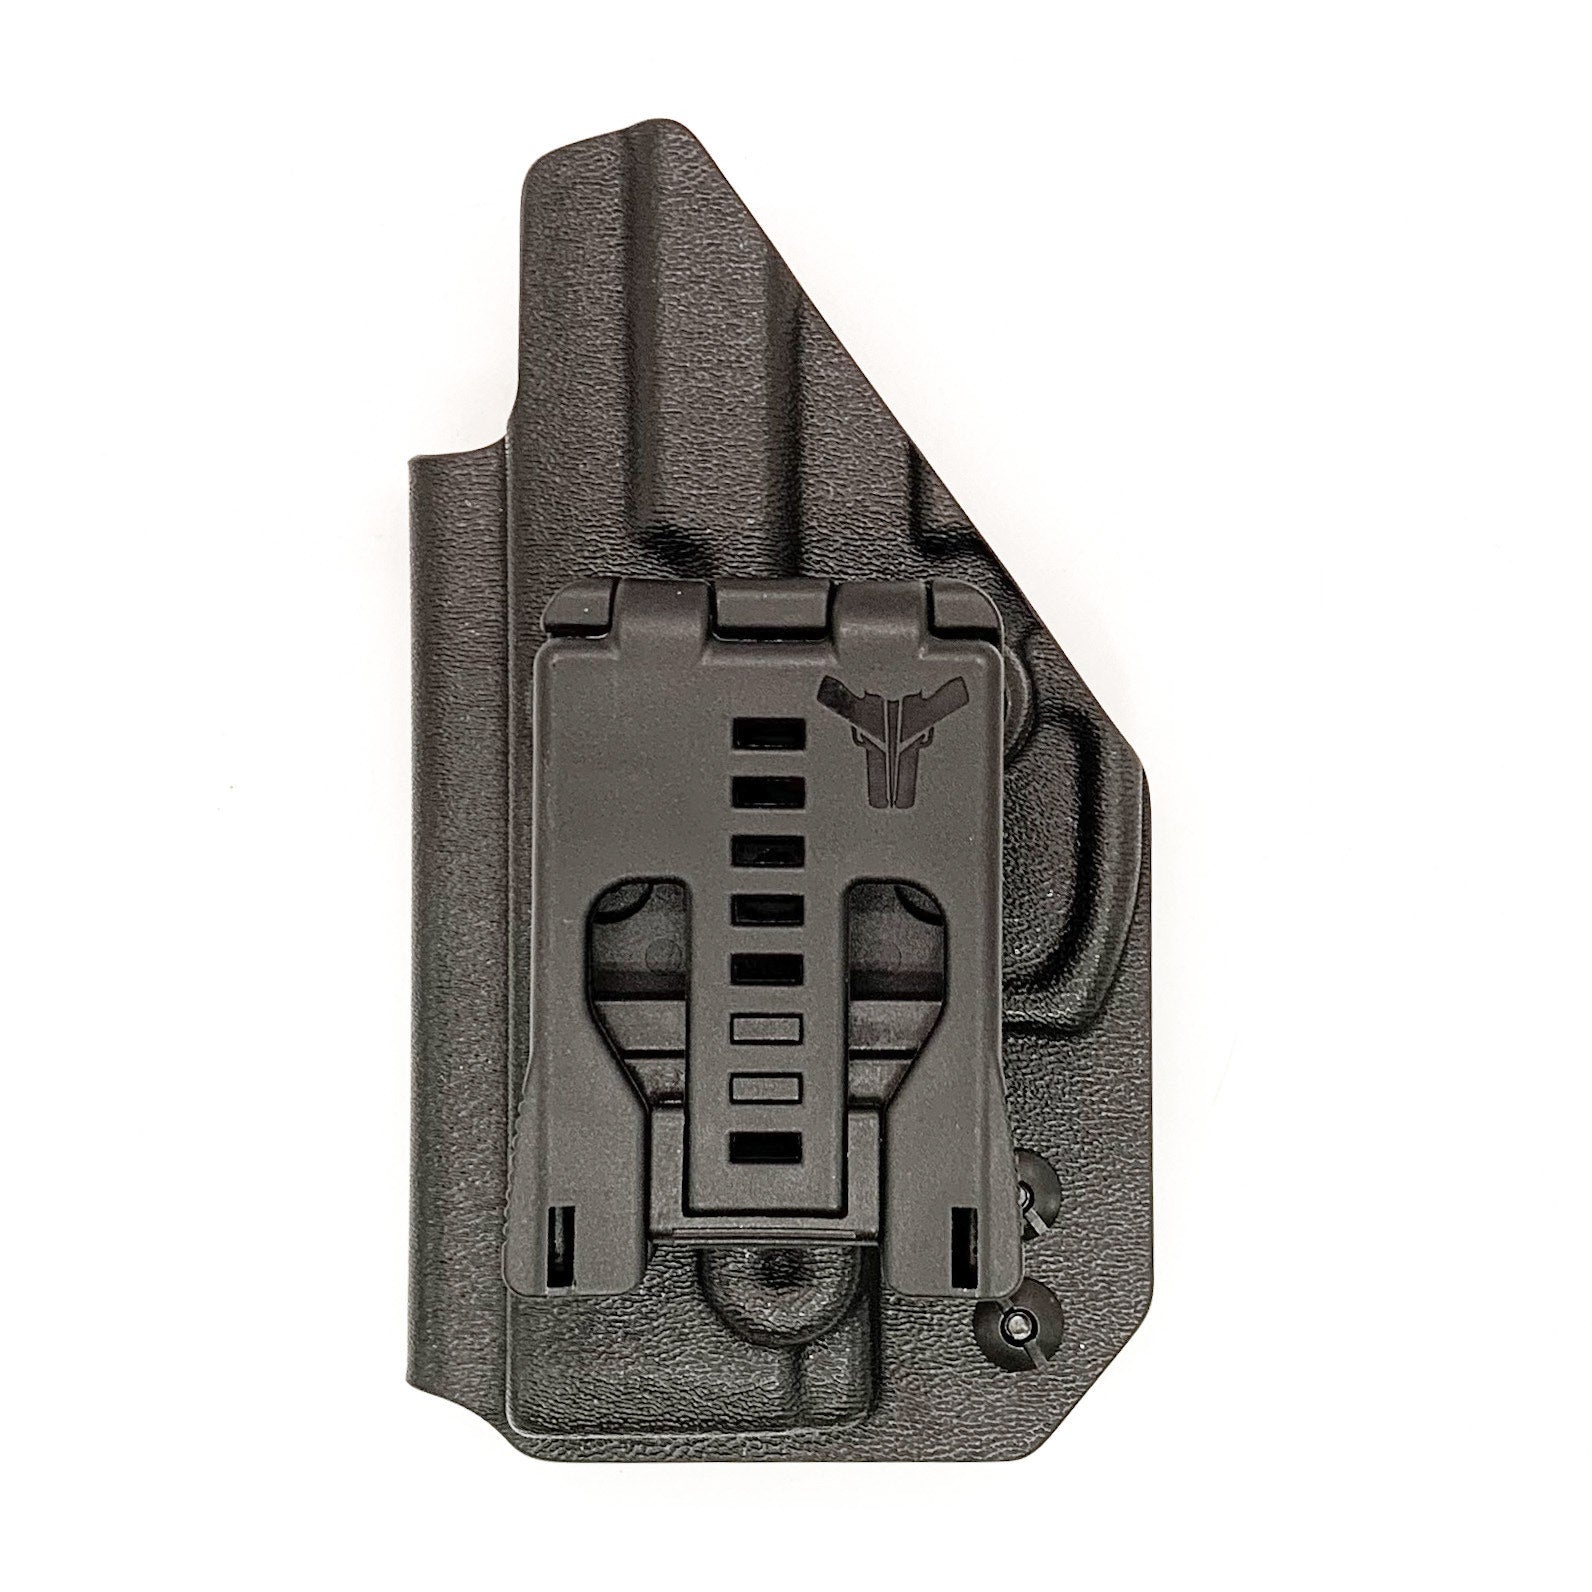 Our Outside Waistband holster for the Taurus G2 pistol is vacuum formed with a precision machined mold designed from a CAD model of the actual firearm. Each holster is formed, trimmed, and folded in-house. Final fit and function tests are done with the actual pistol to ensure the holster fits the gun and has the correct amount of retention.